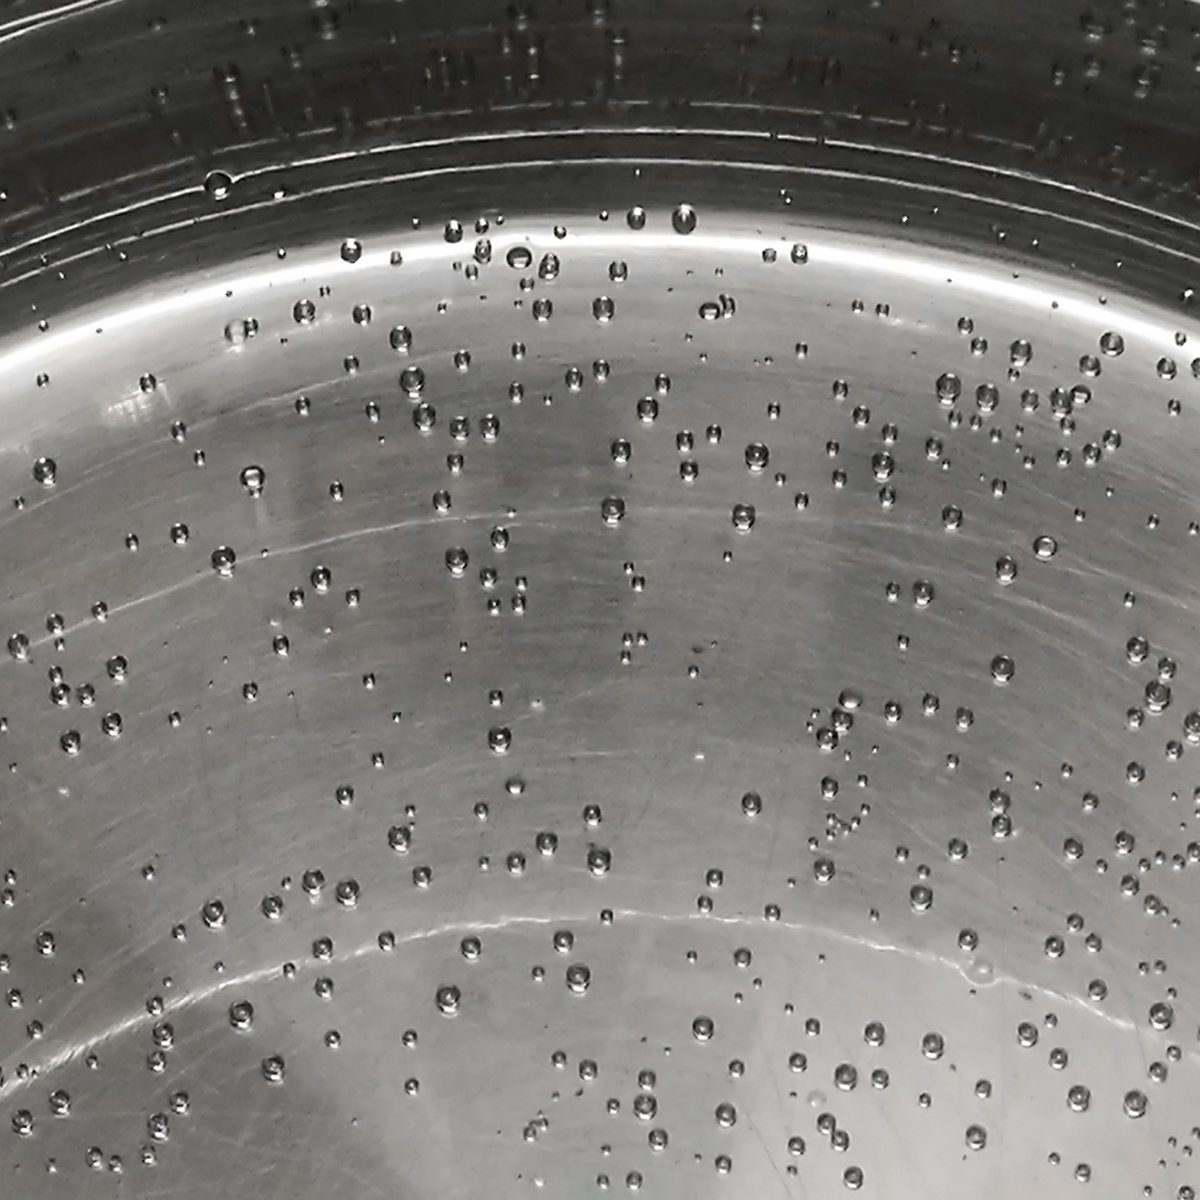 Drops of water on pan / saucepan stainless steel surface.